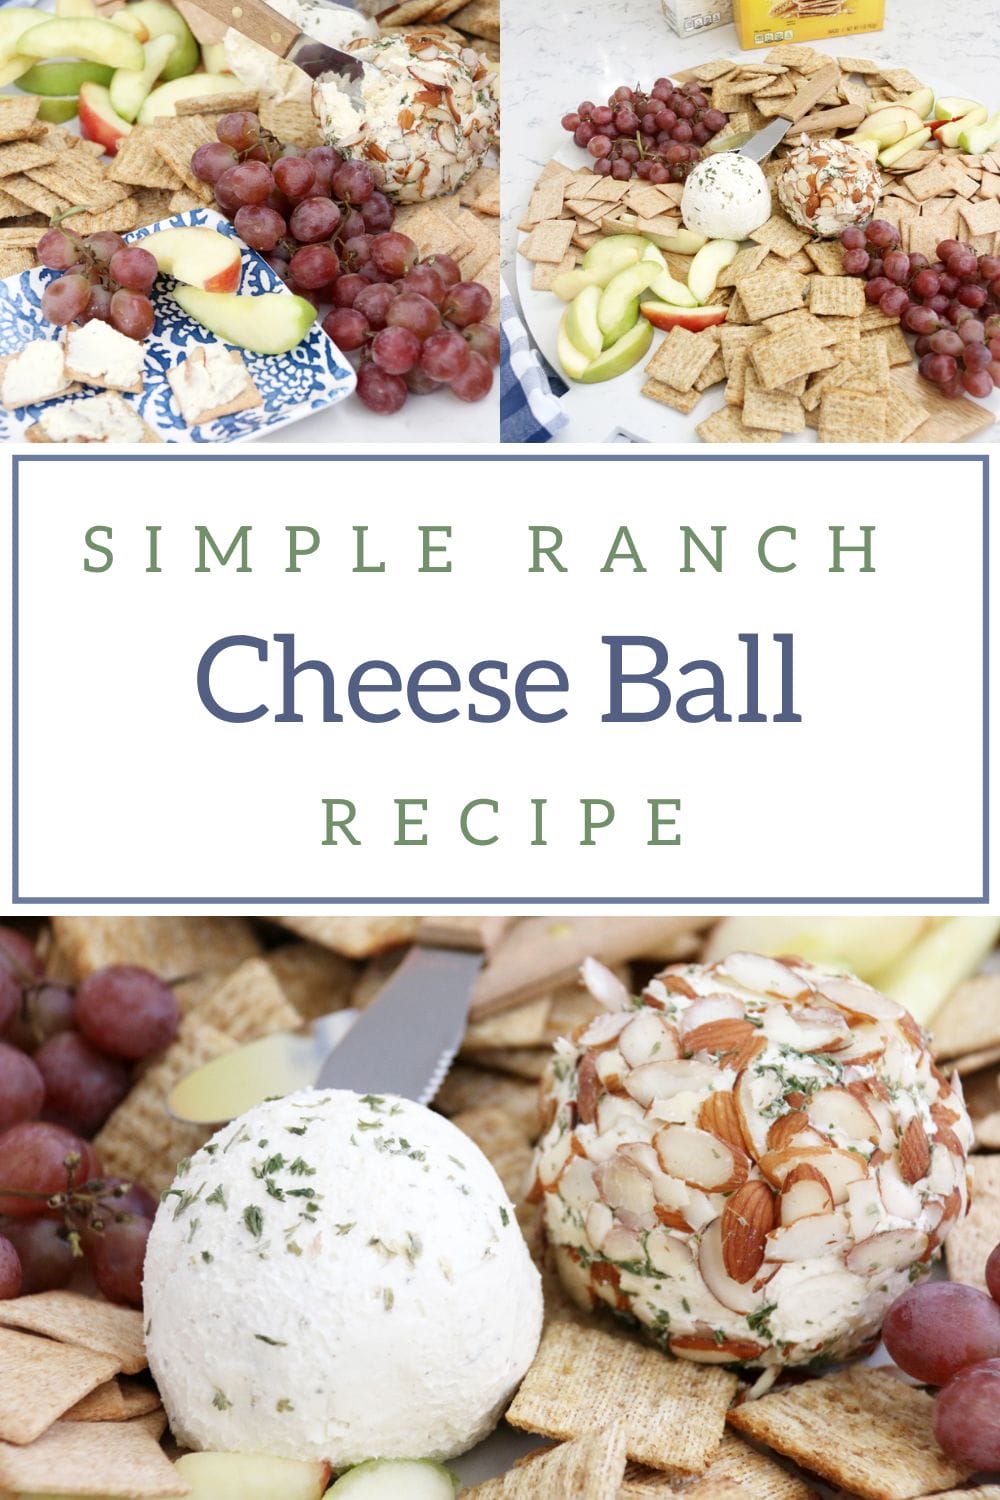 Simple Ranch Cheese Ball Recipe perfect for holiday parties